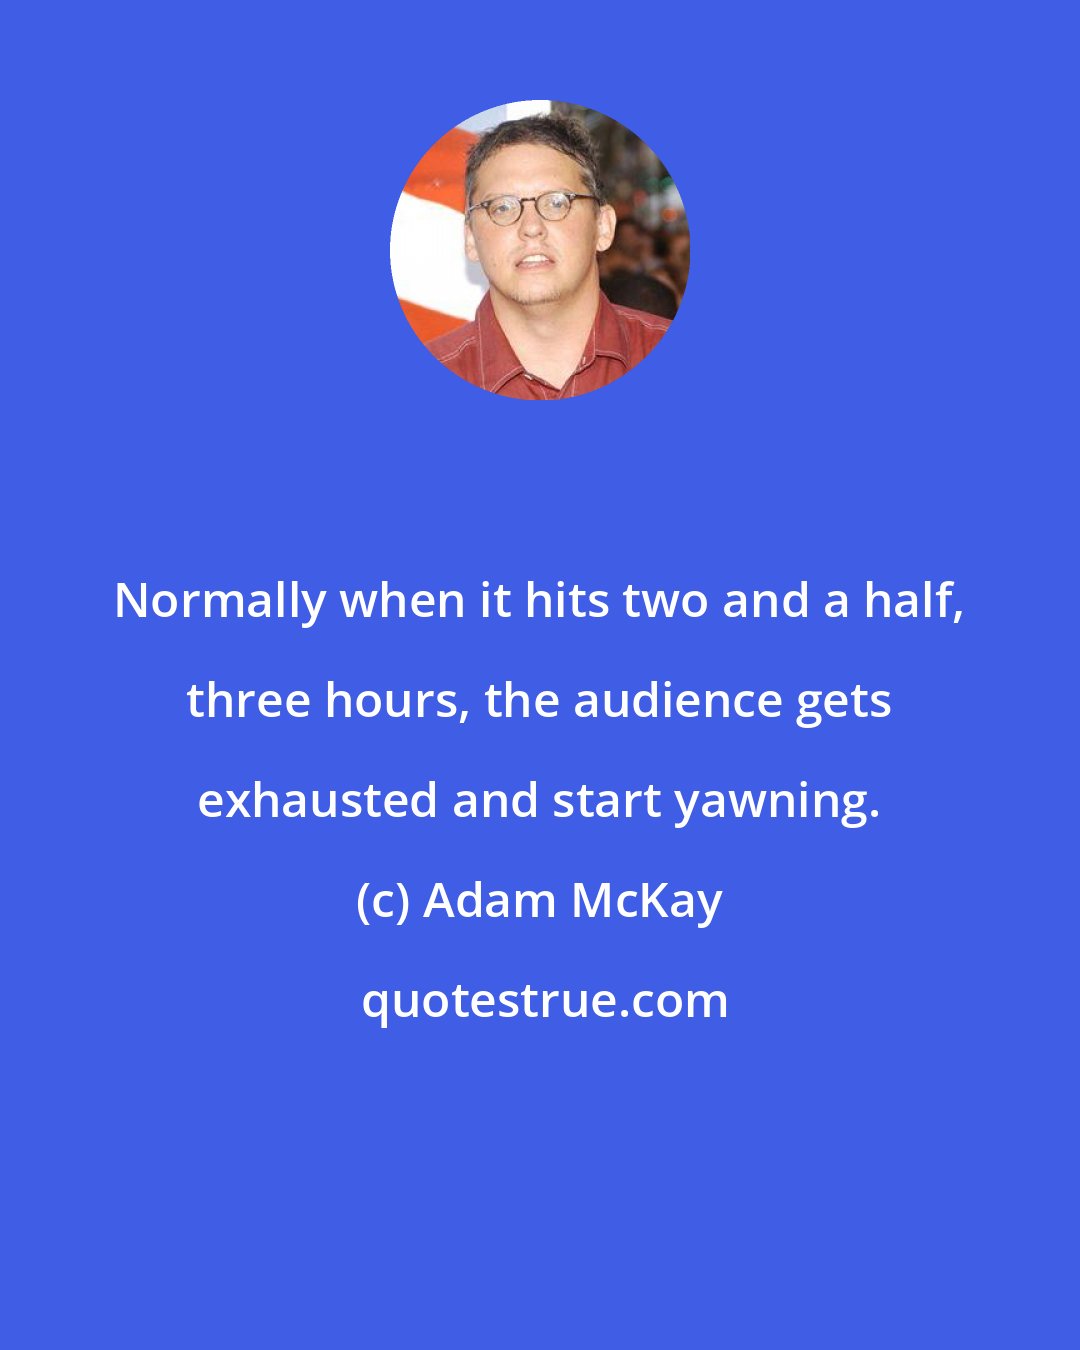 Adam McKay: Normally when it hits two and a half, three hours, the audience gets exhausted and start yawning.